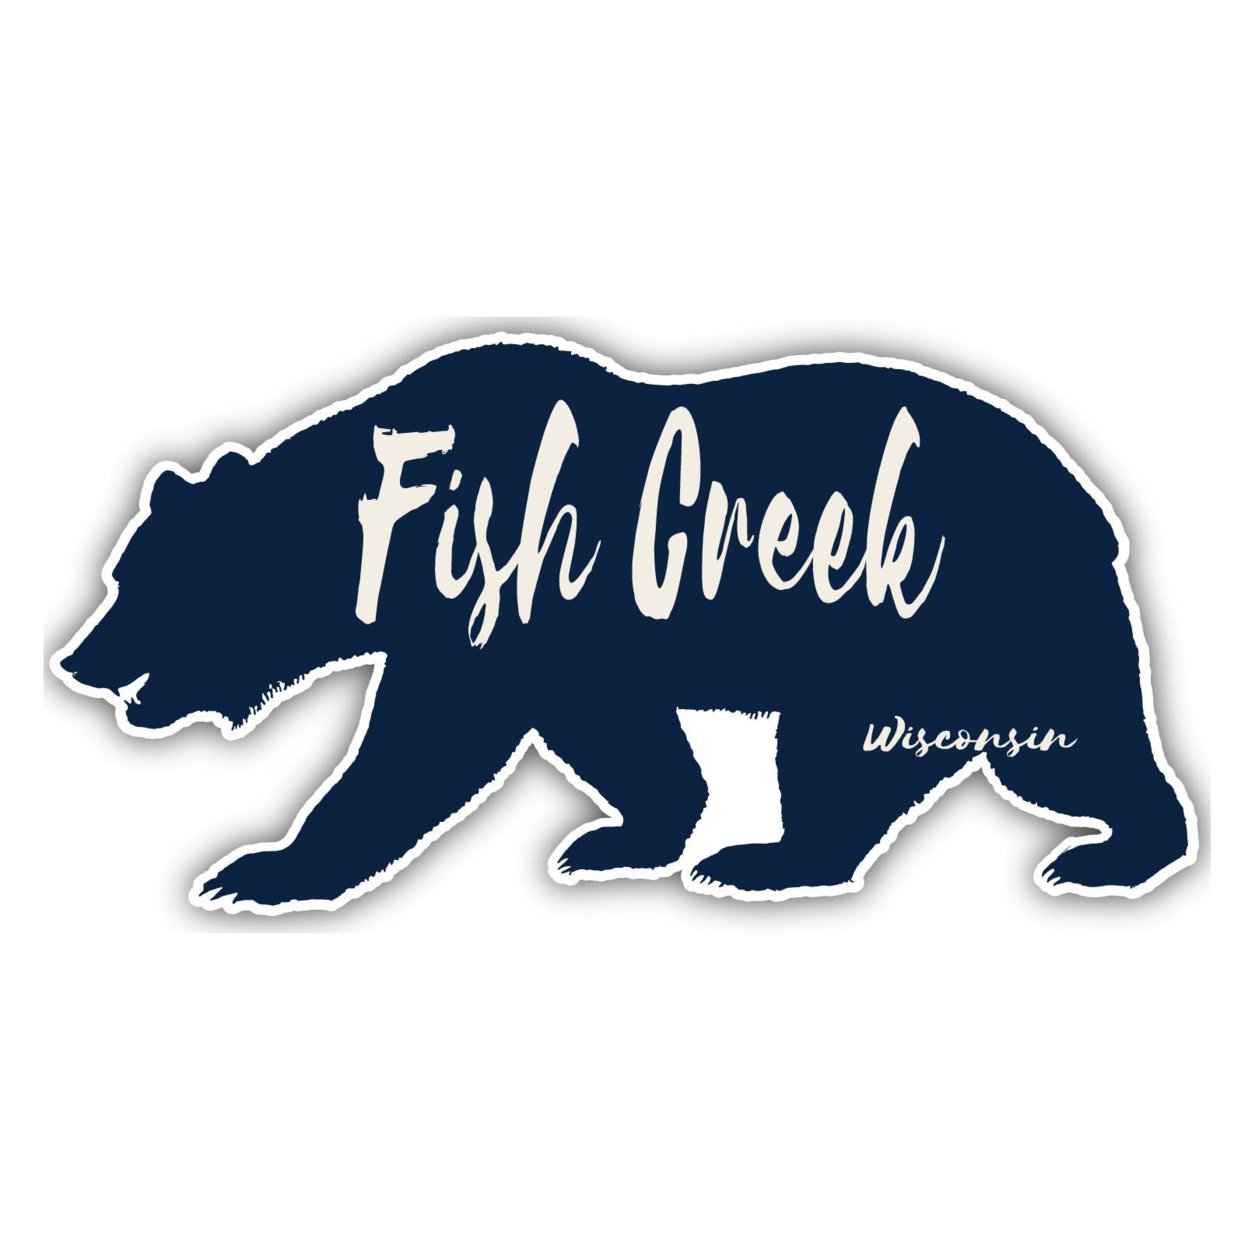 Fish Creek Wisconsin Souvenir Decorative Stickers (Choose Theme And Size) - 4-Pack, 6-Inch, Bear